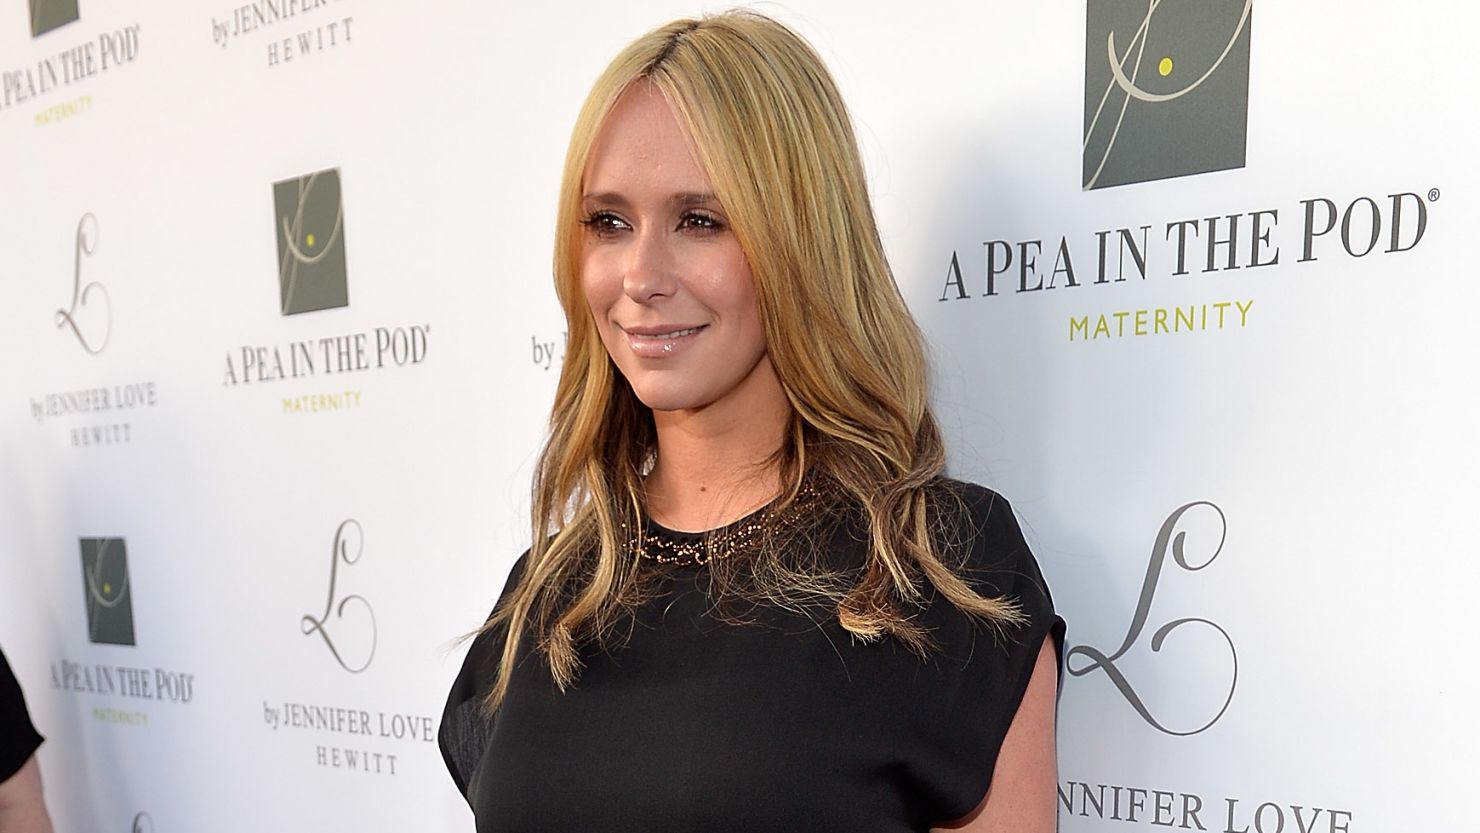 Jennifer Love Hewitt last appeared on Lifetime's series "The Client List," which ran for two seasons.